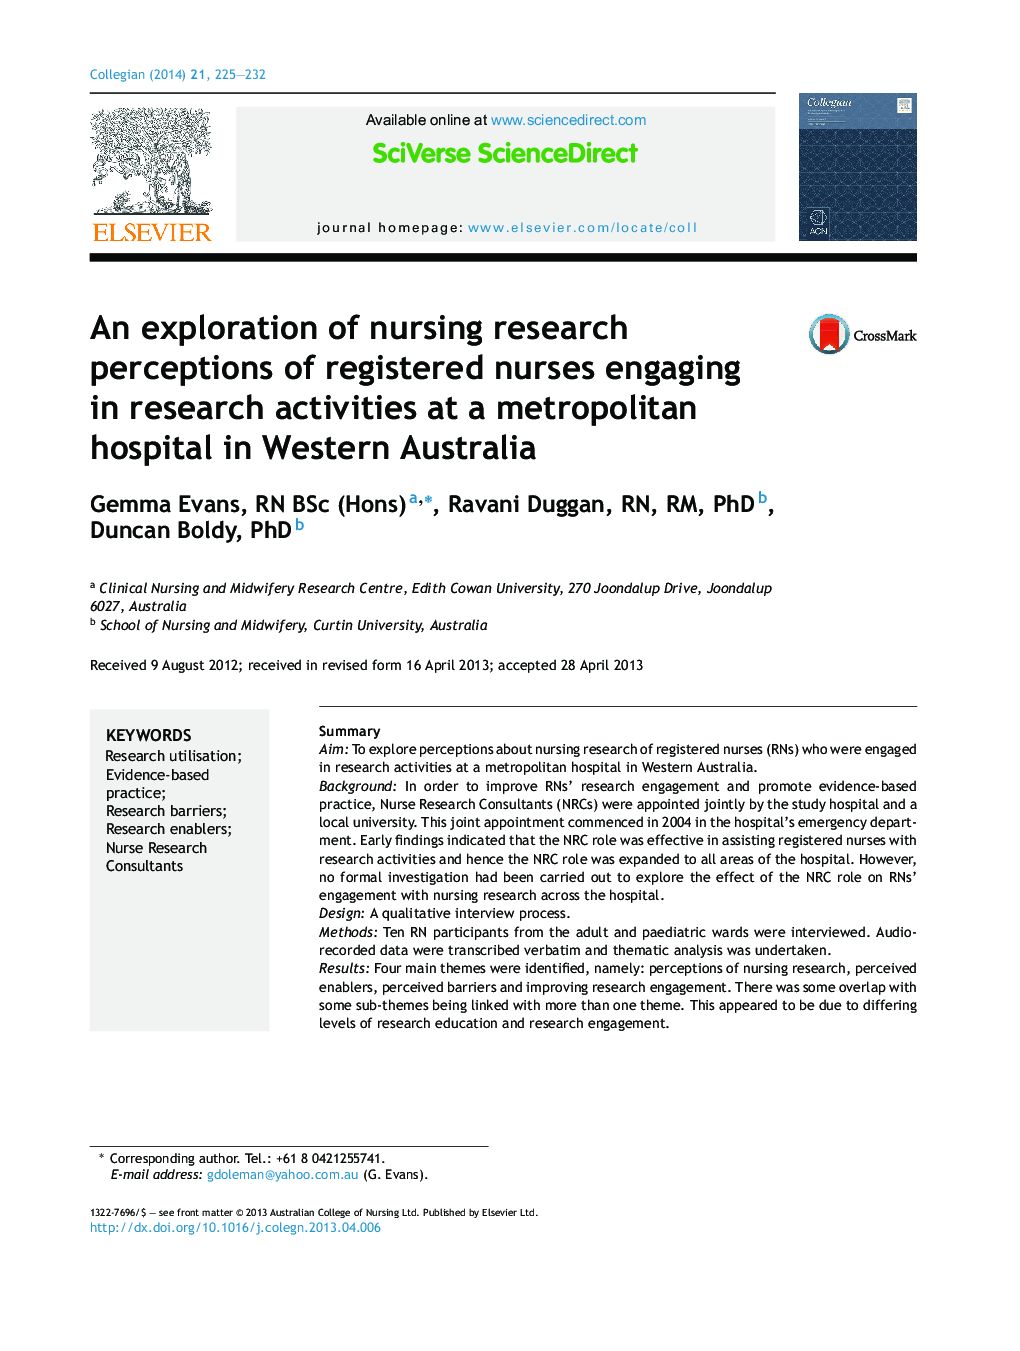 An exploration of nursing research perceptions of registered nurses engaging in research activities at a metropolitan hospital in Western Australia